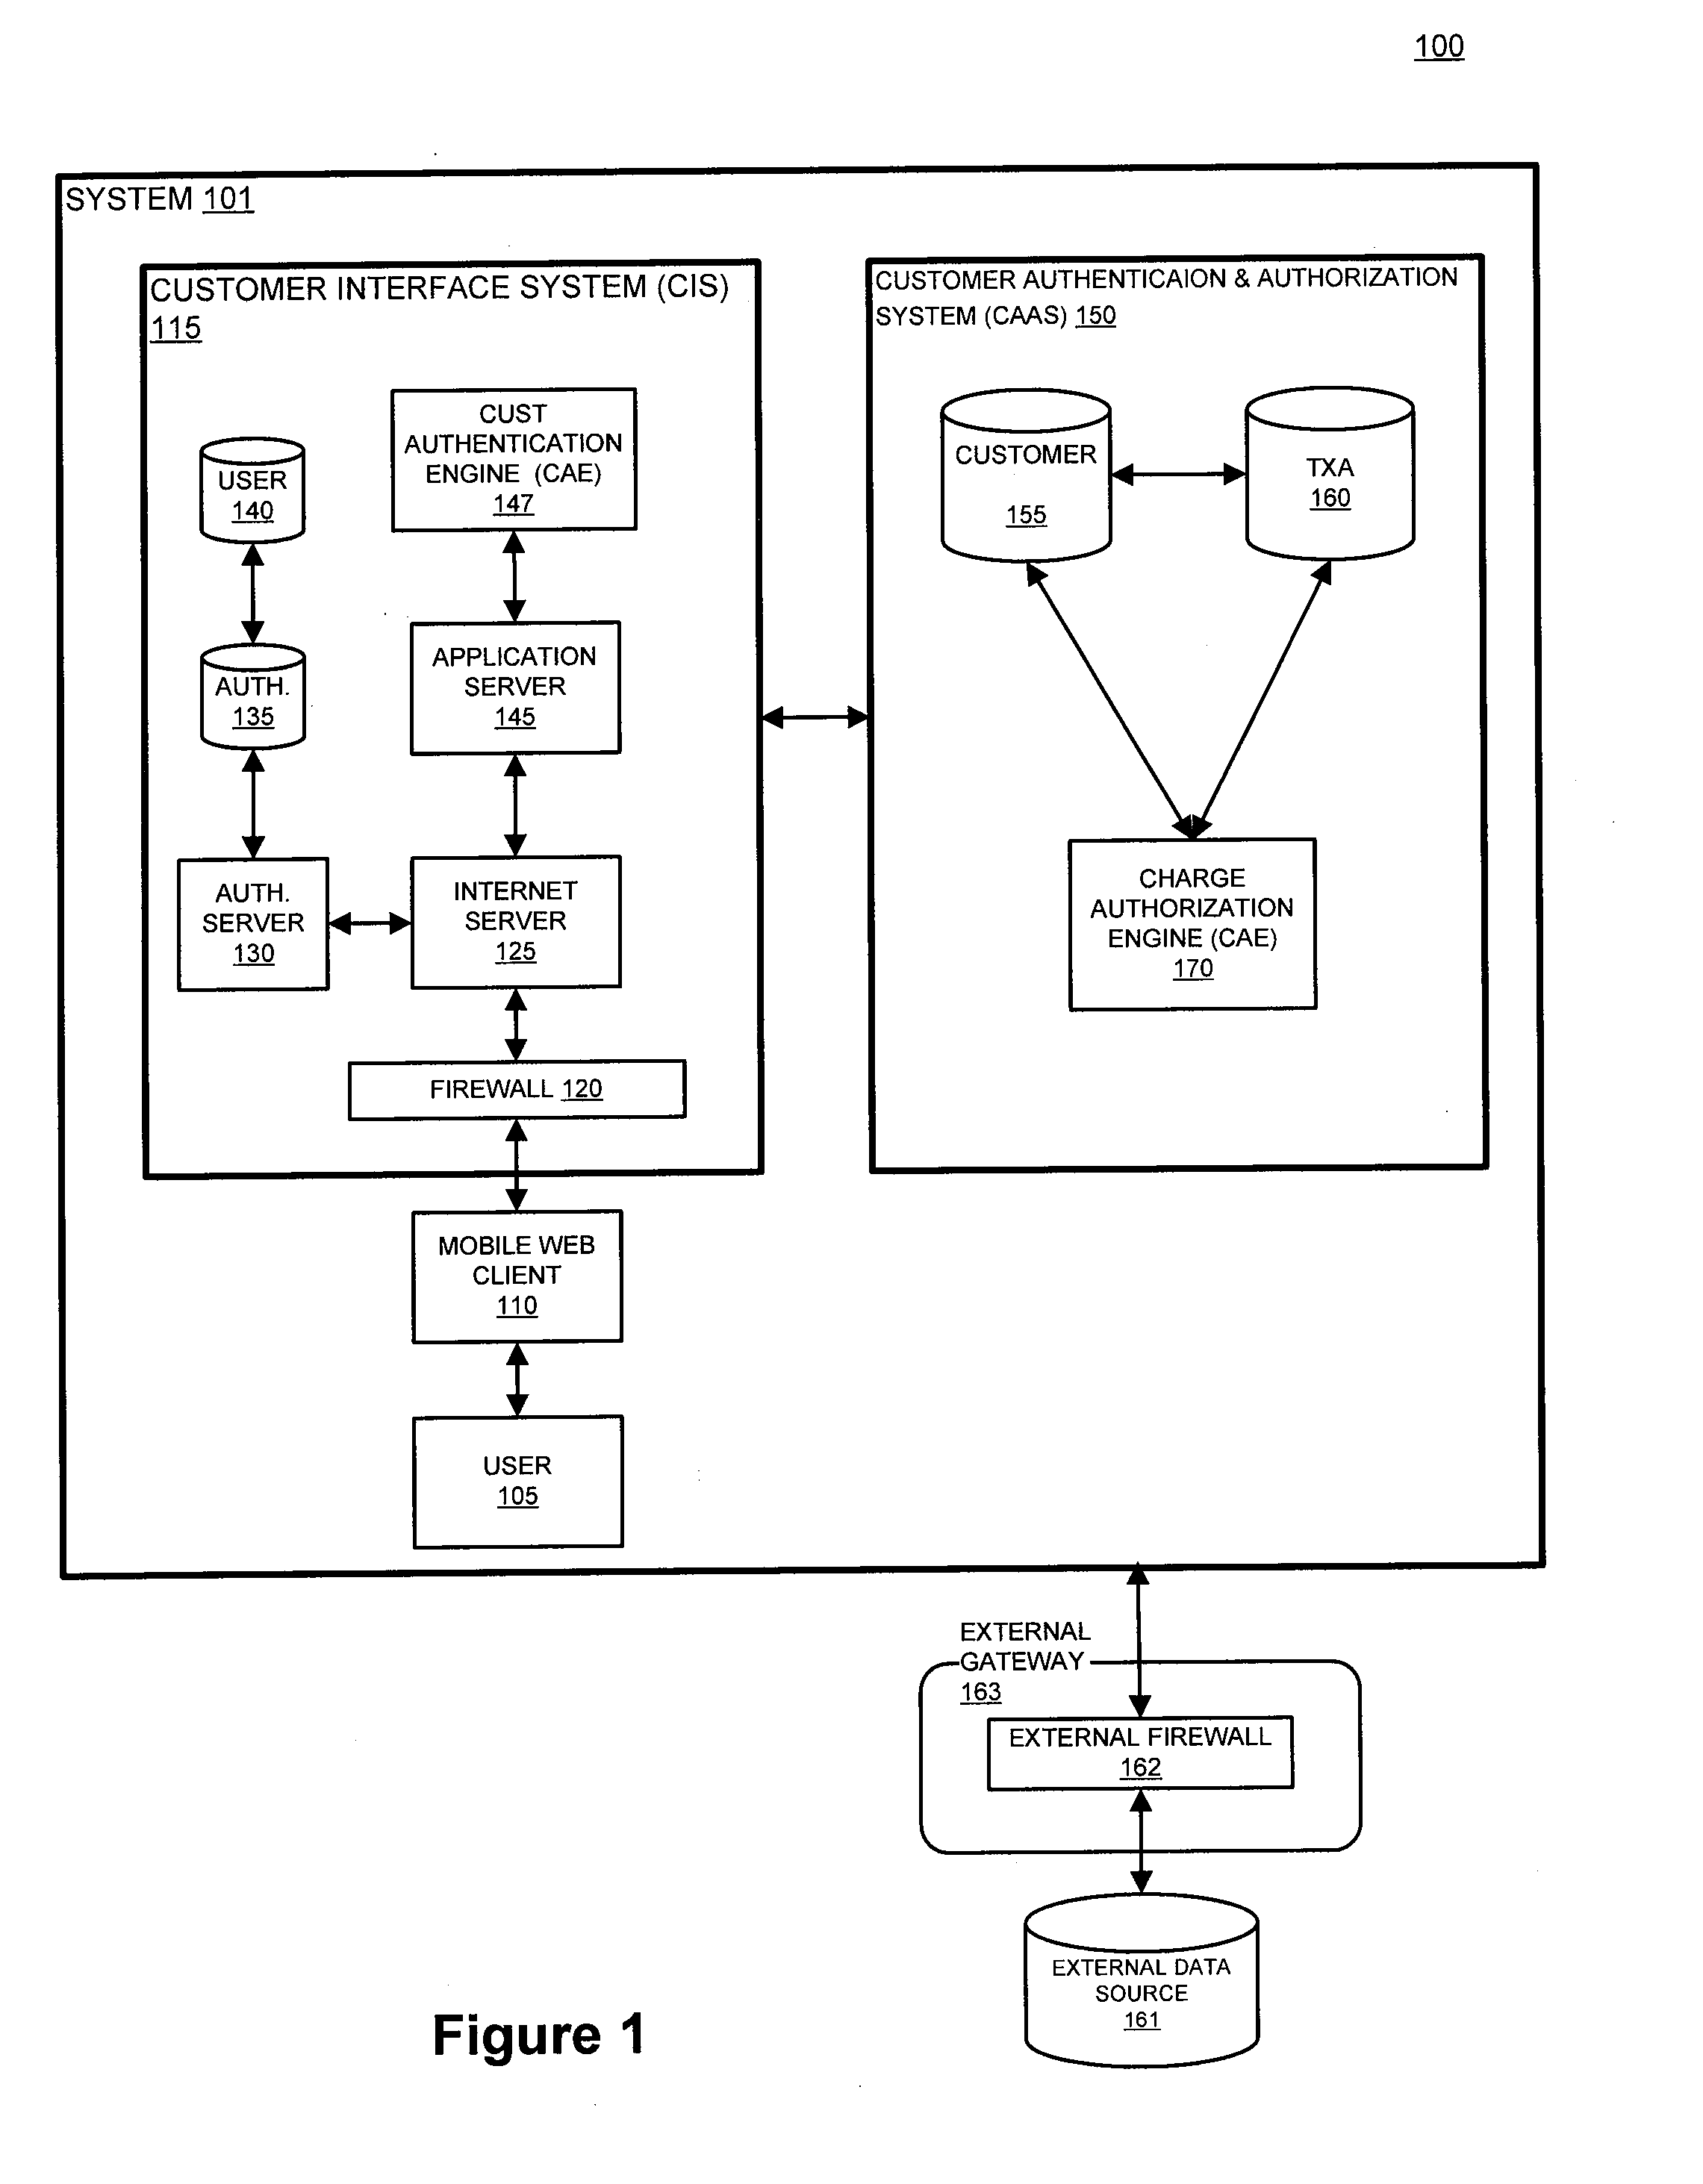 Dynamic account authentication using a mobile device